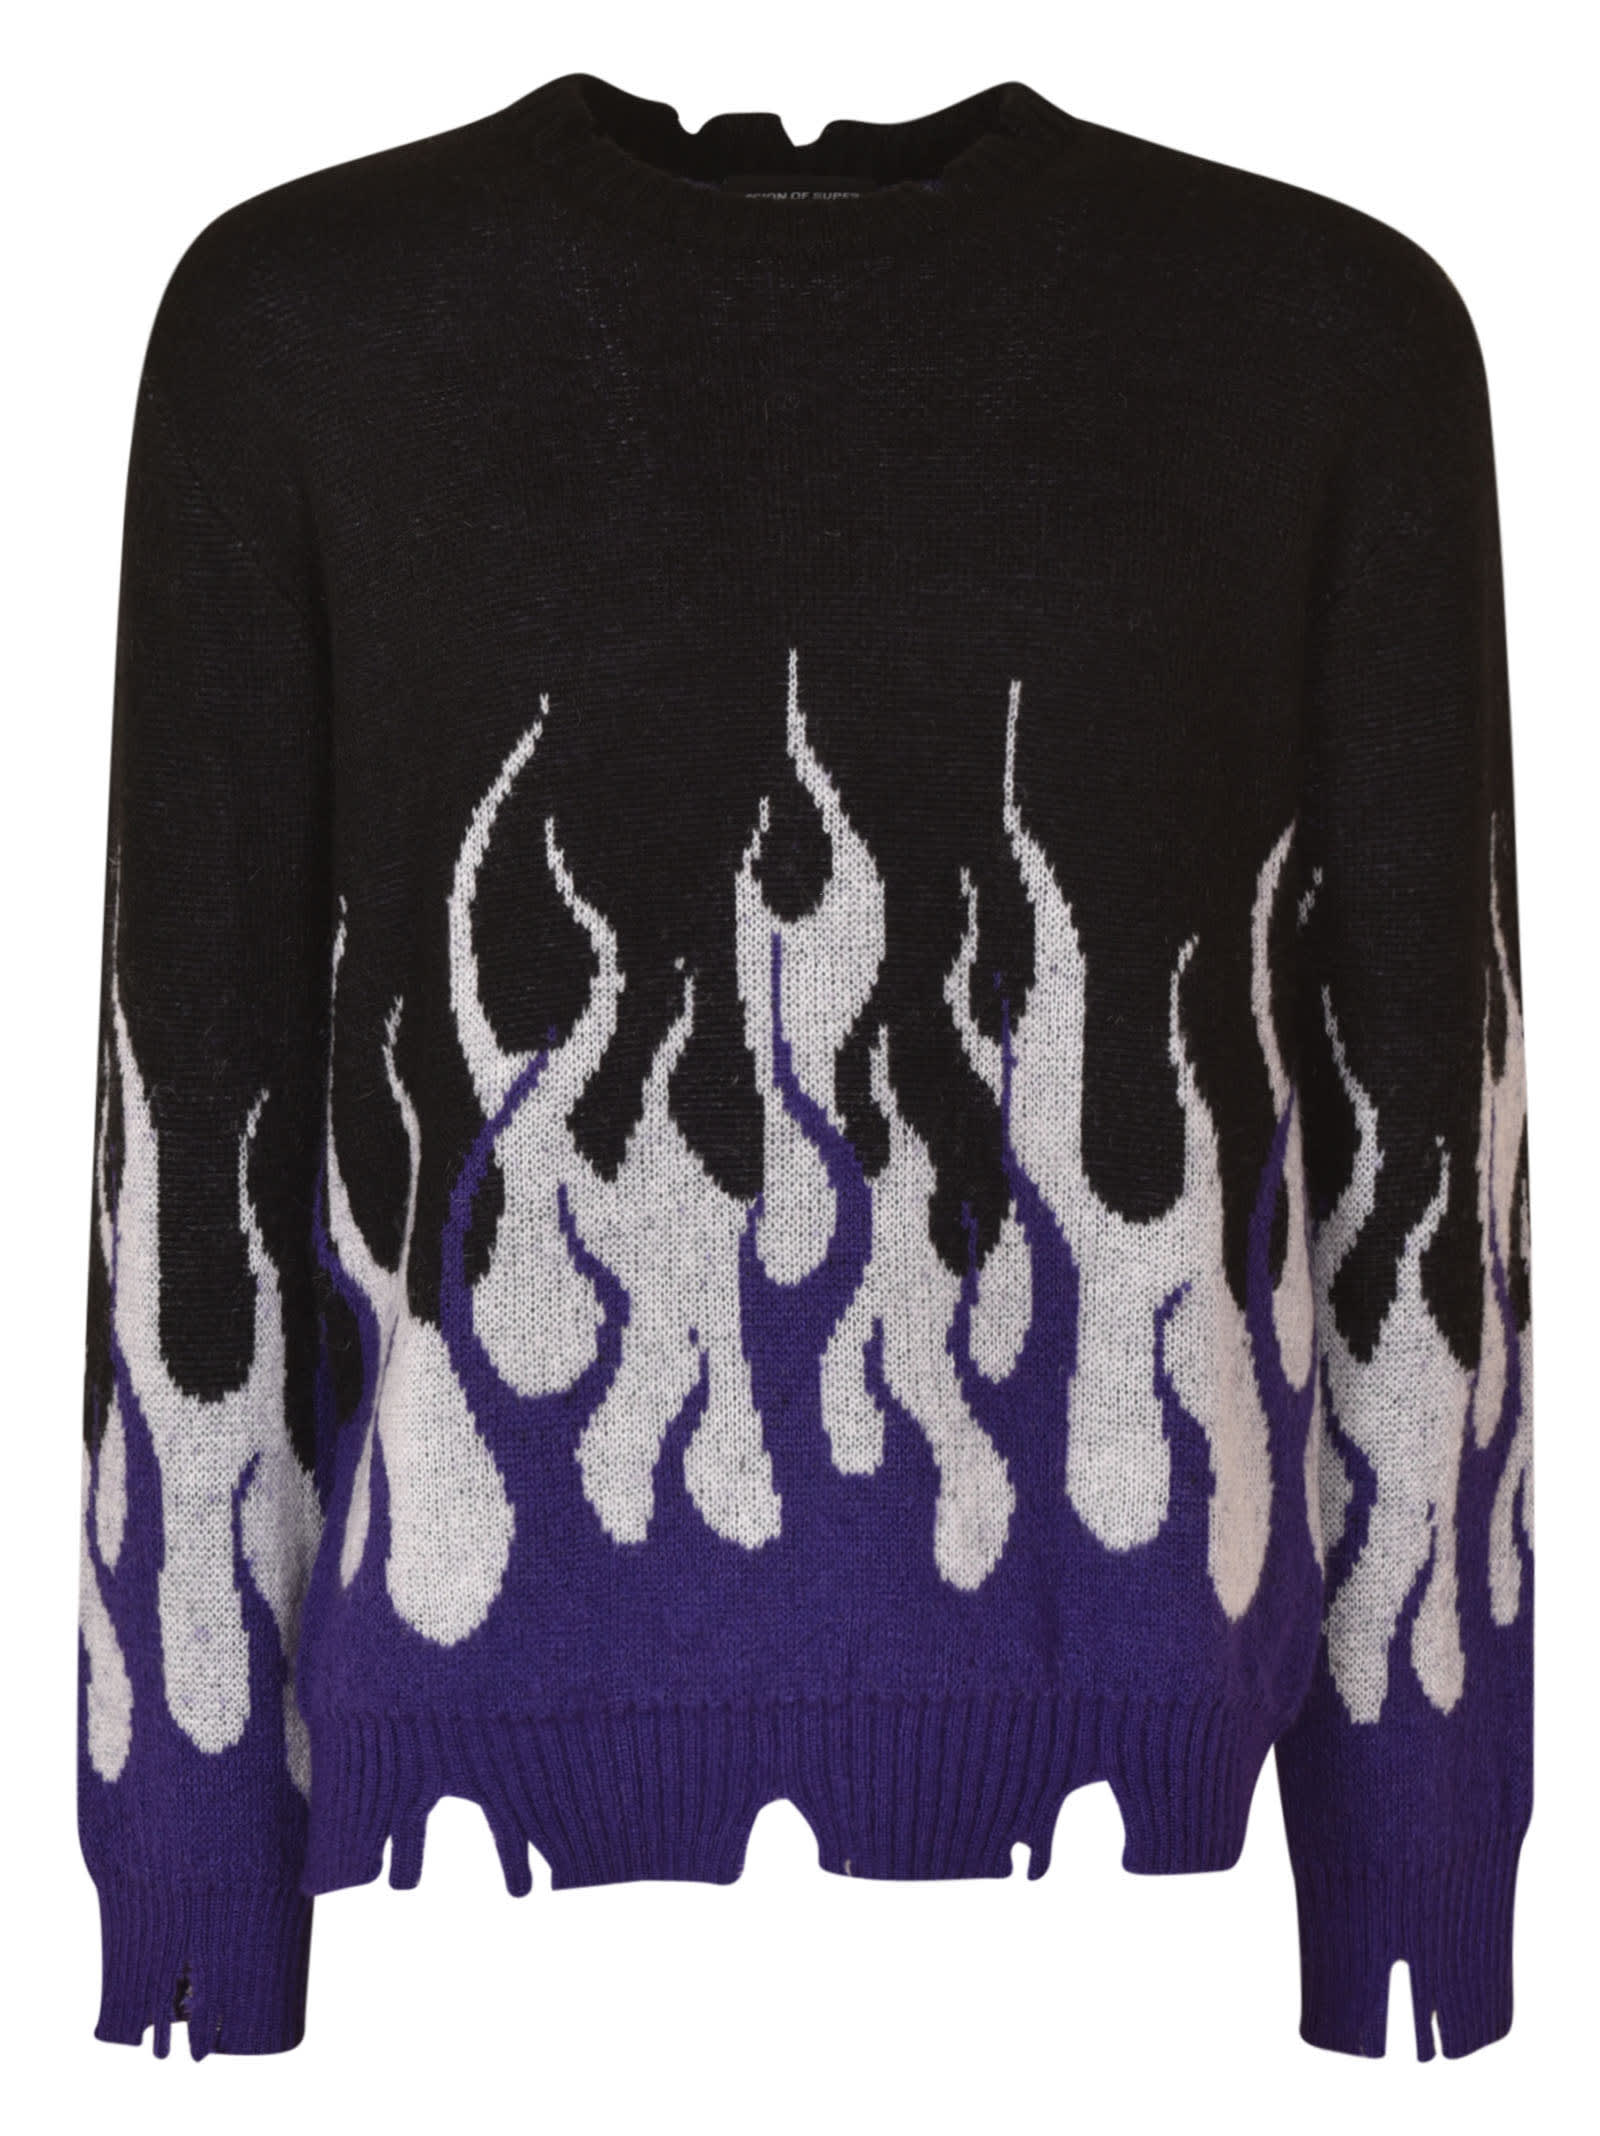 Vision of Super Flame Print Distressed Sweater